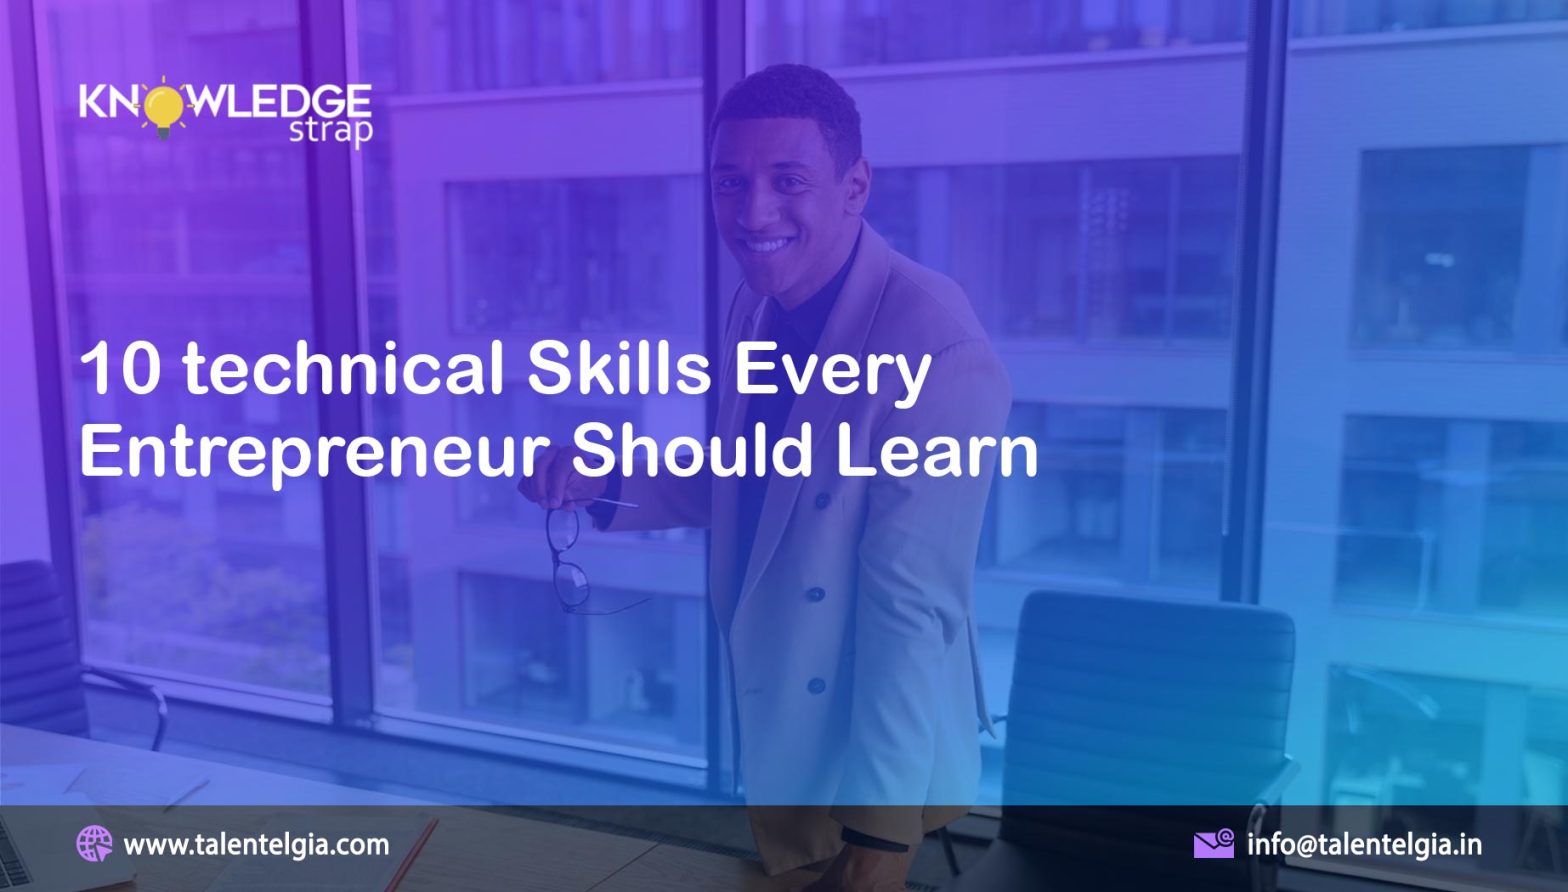 10 technical Skills Every Entrepreneur Should Learn